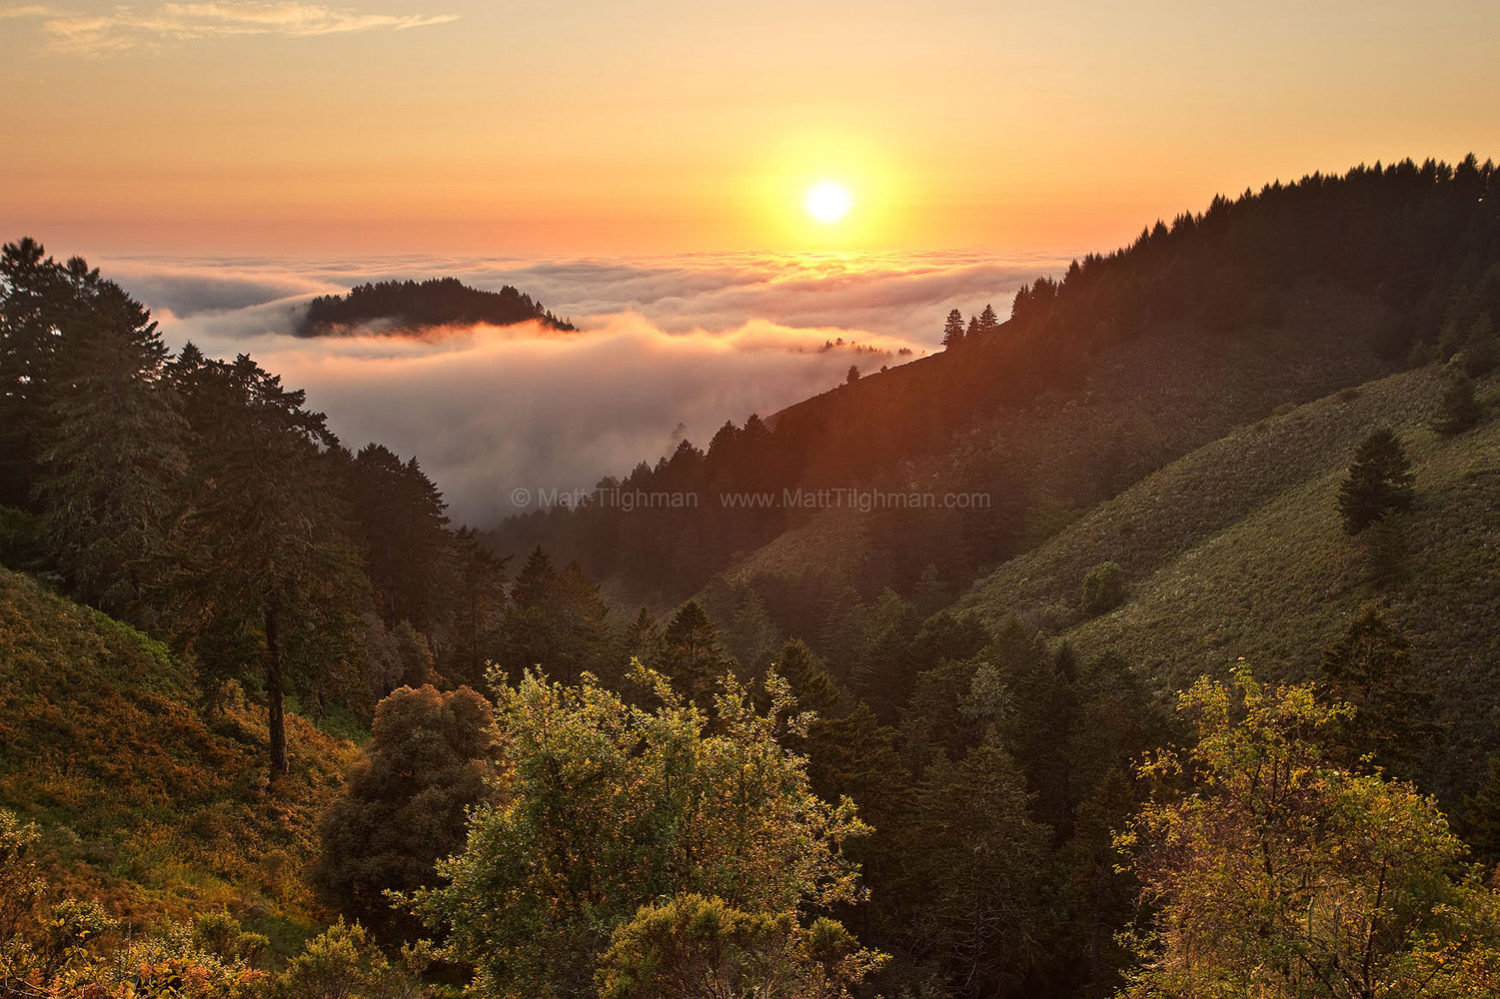 Fine art stock photograph from Whittemore Gulch, in Purisima Creek Redwoods, California. Fog from the Pacific Ocean turns the landscape into a cloudy archipelago.